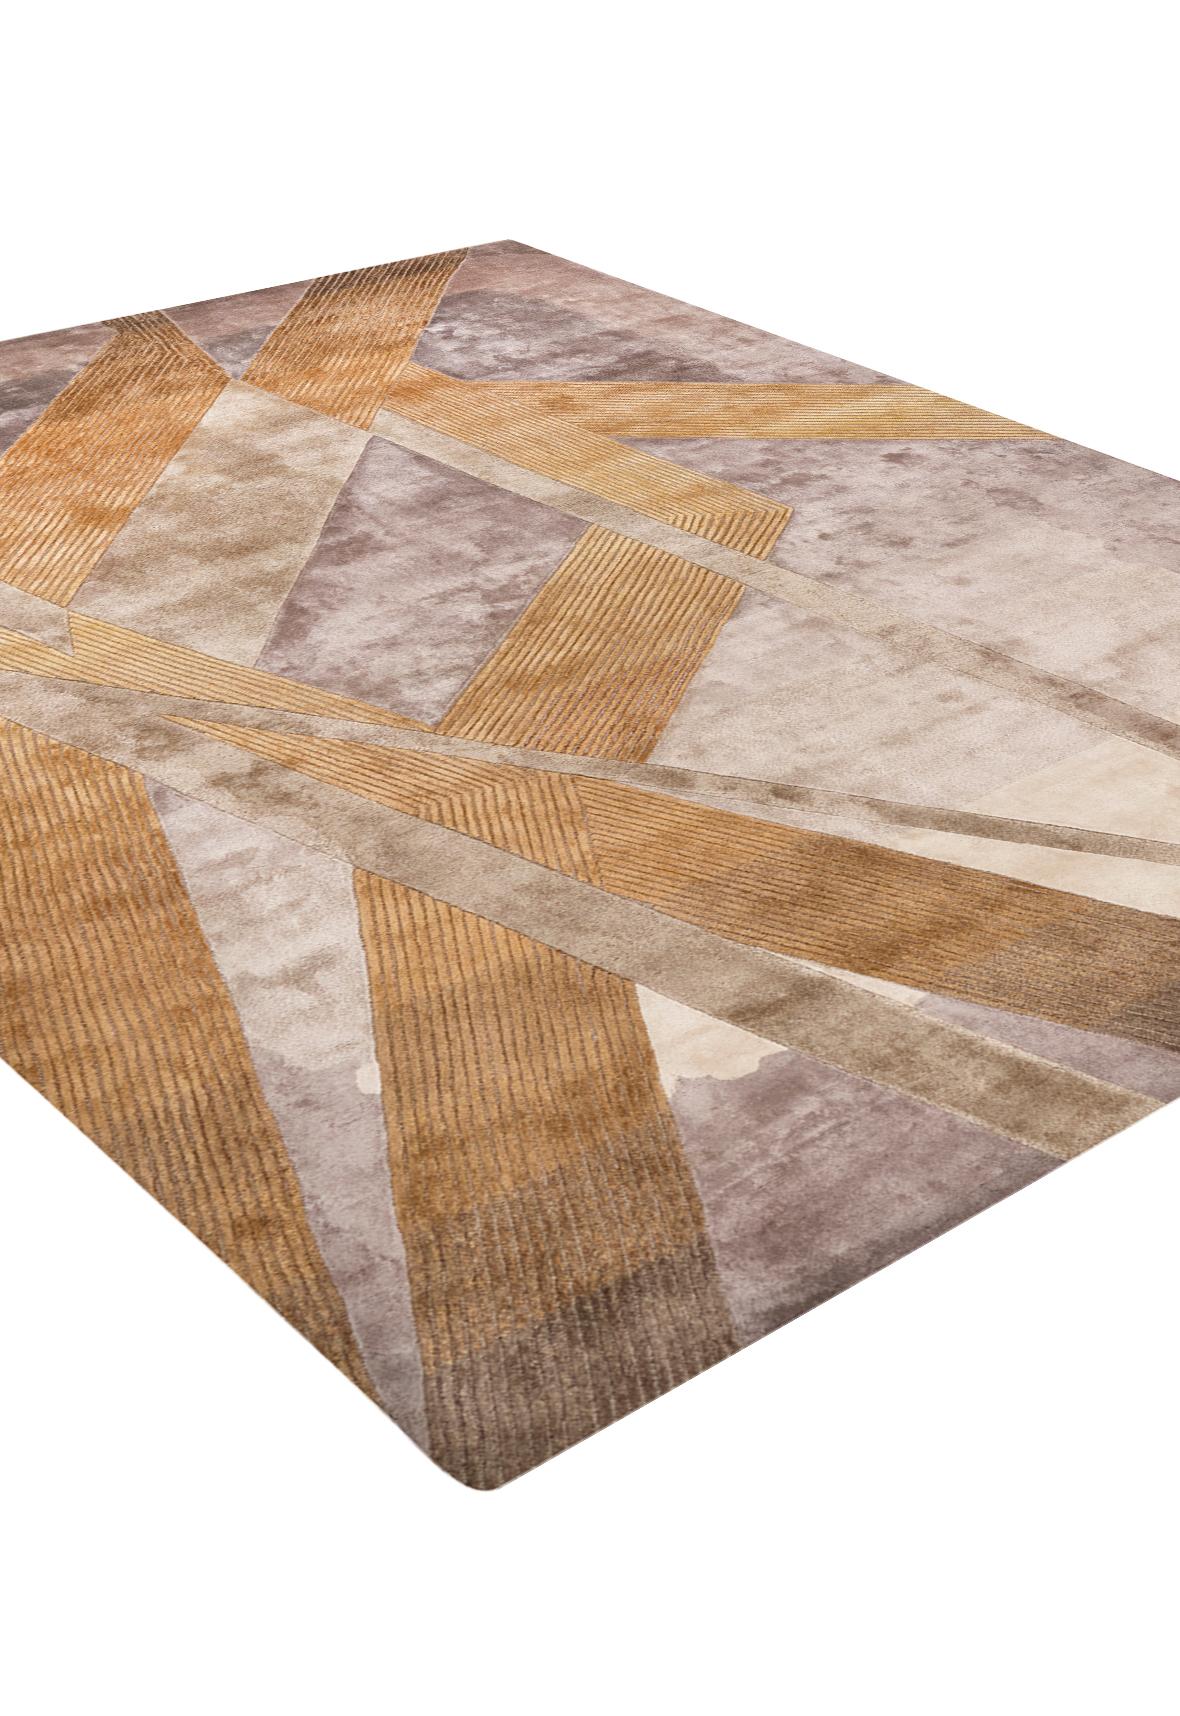 Adrift Hand Tufted Modern Silk & Wool Rug in Rust, Gold & Teal Colours by Hands For Sale 1